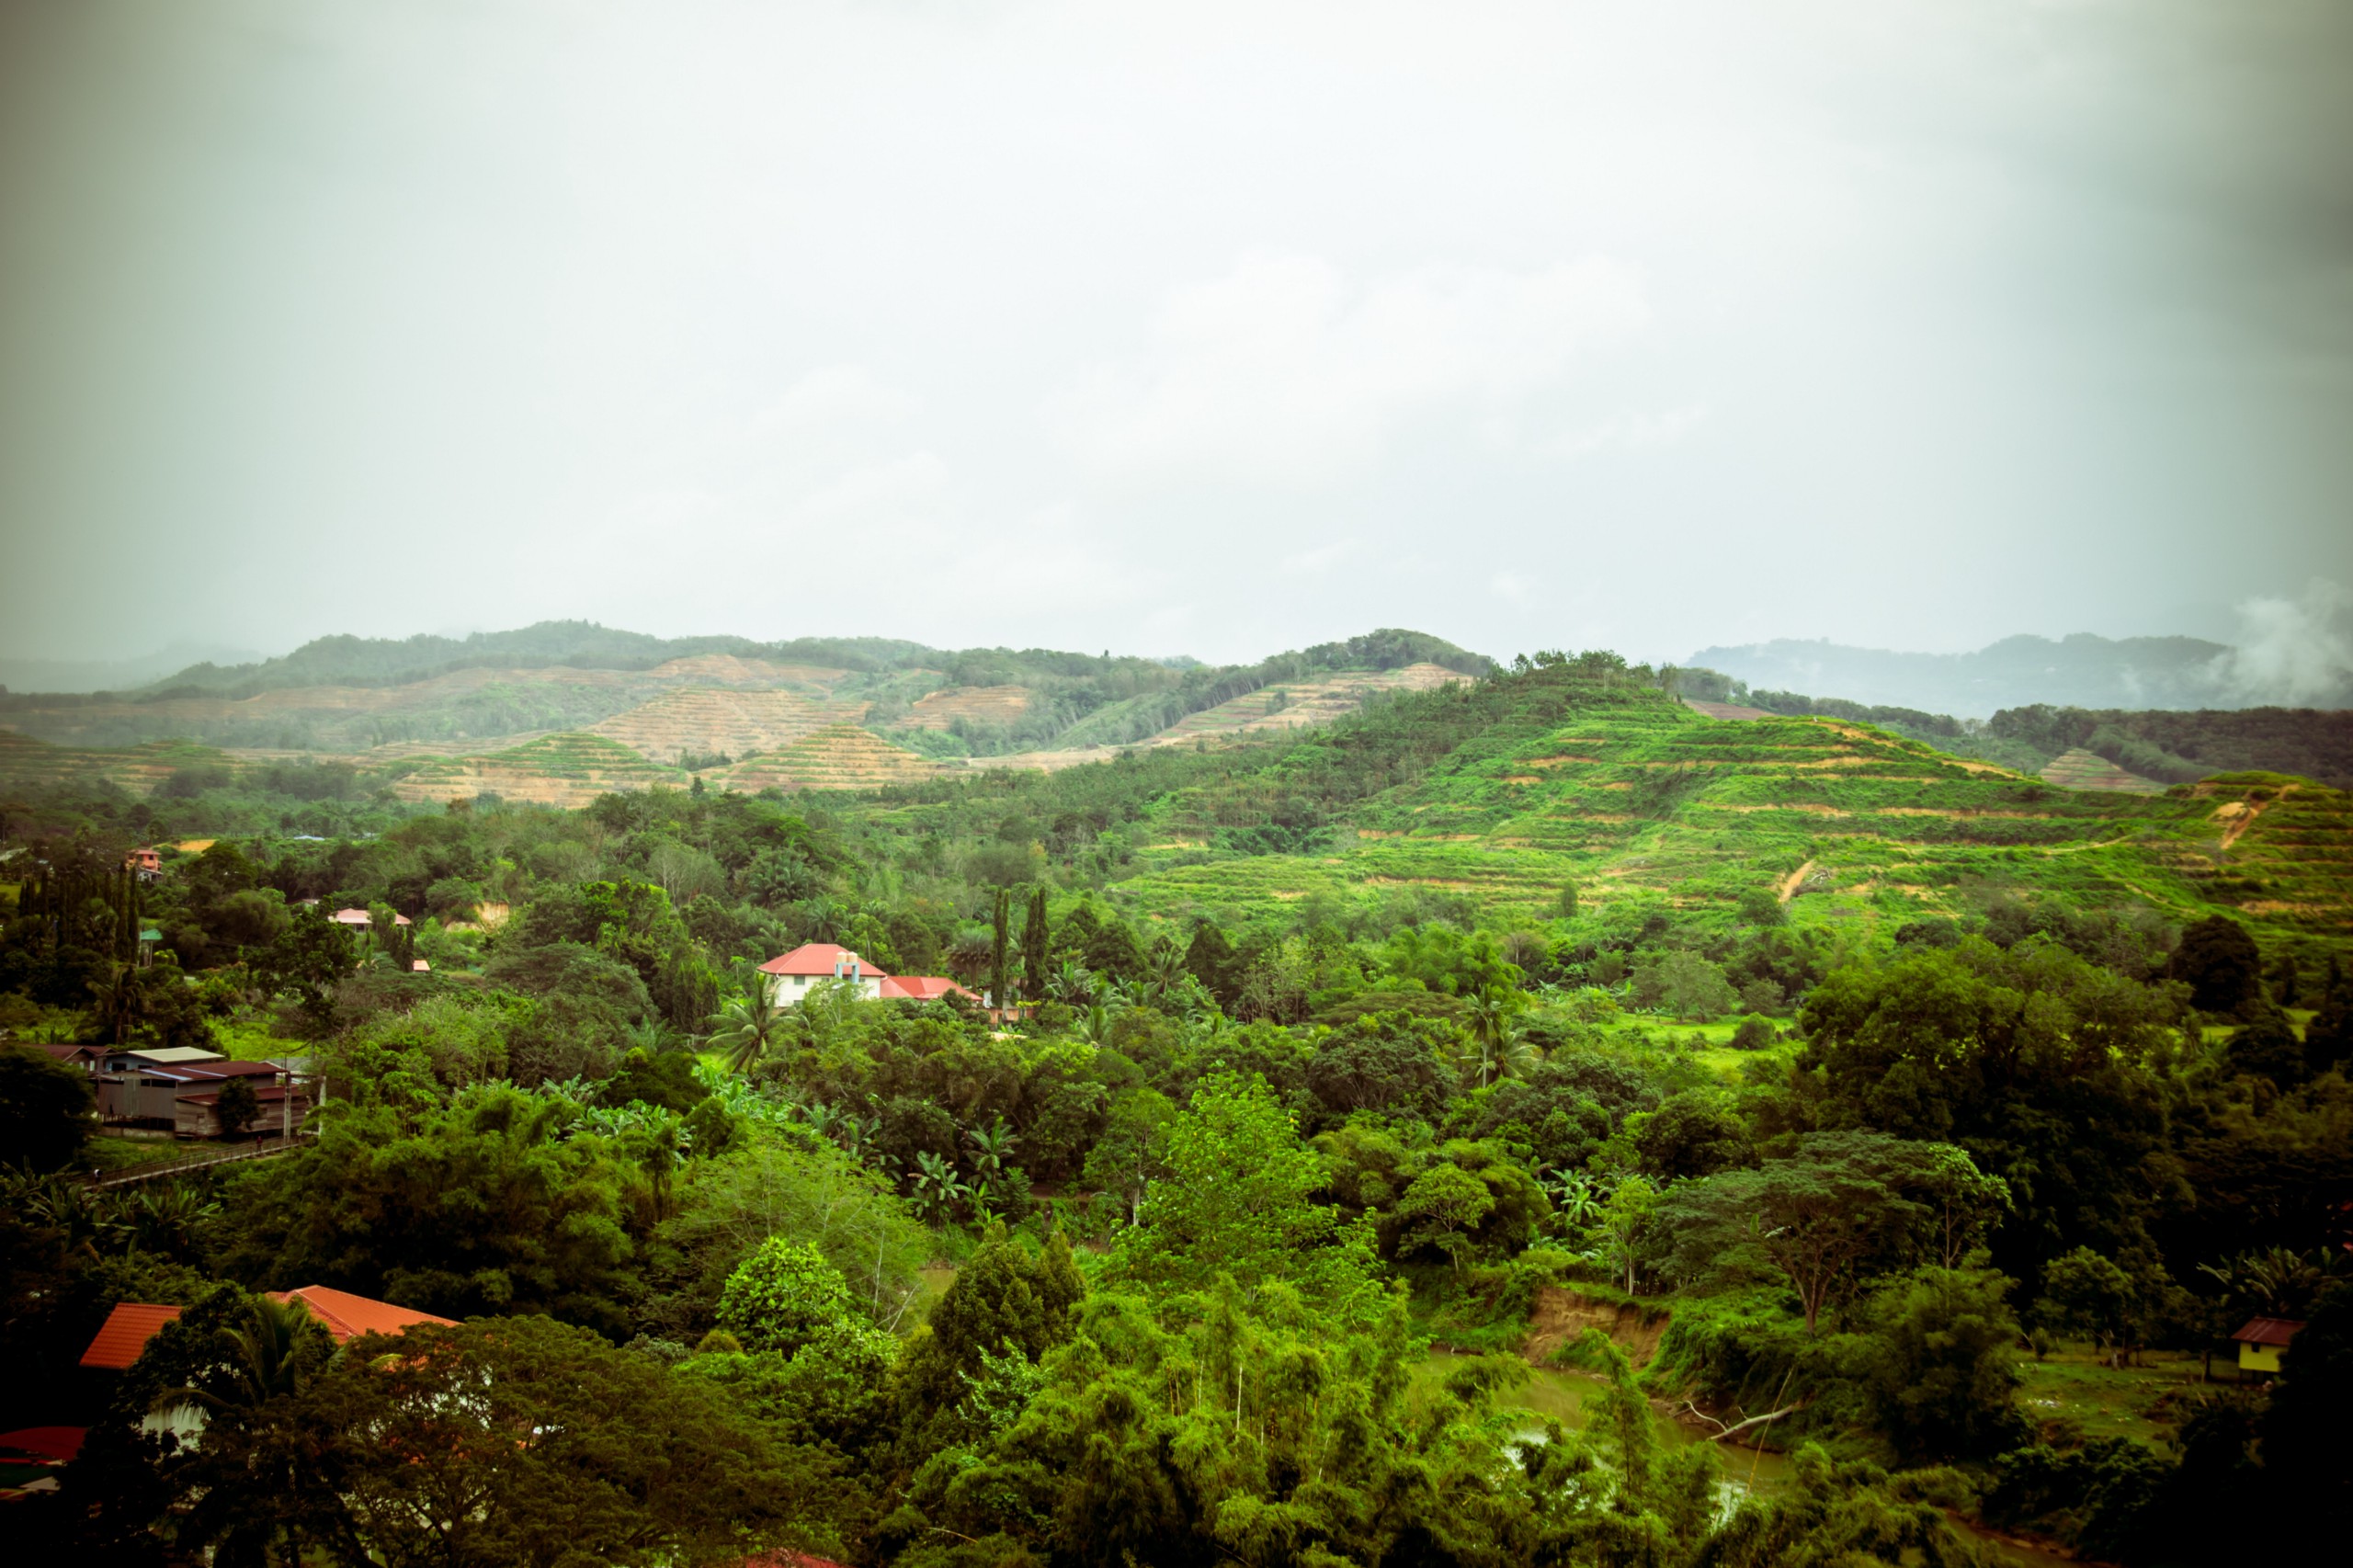 A lush jungle landscape, with terraced farms on the hills in the distance.